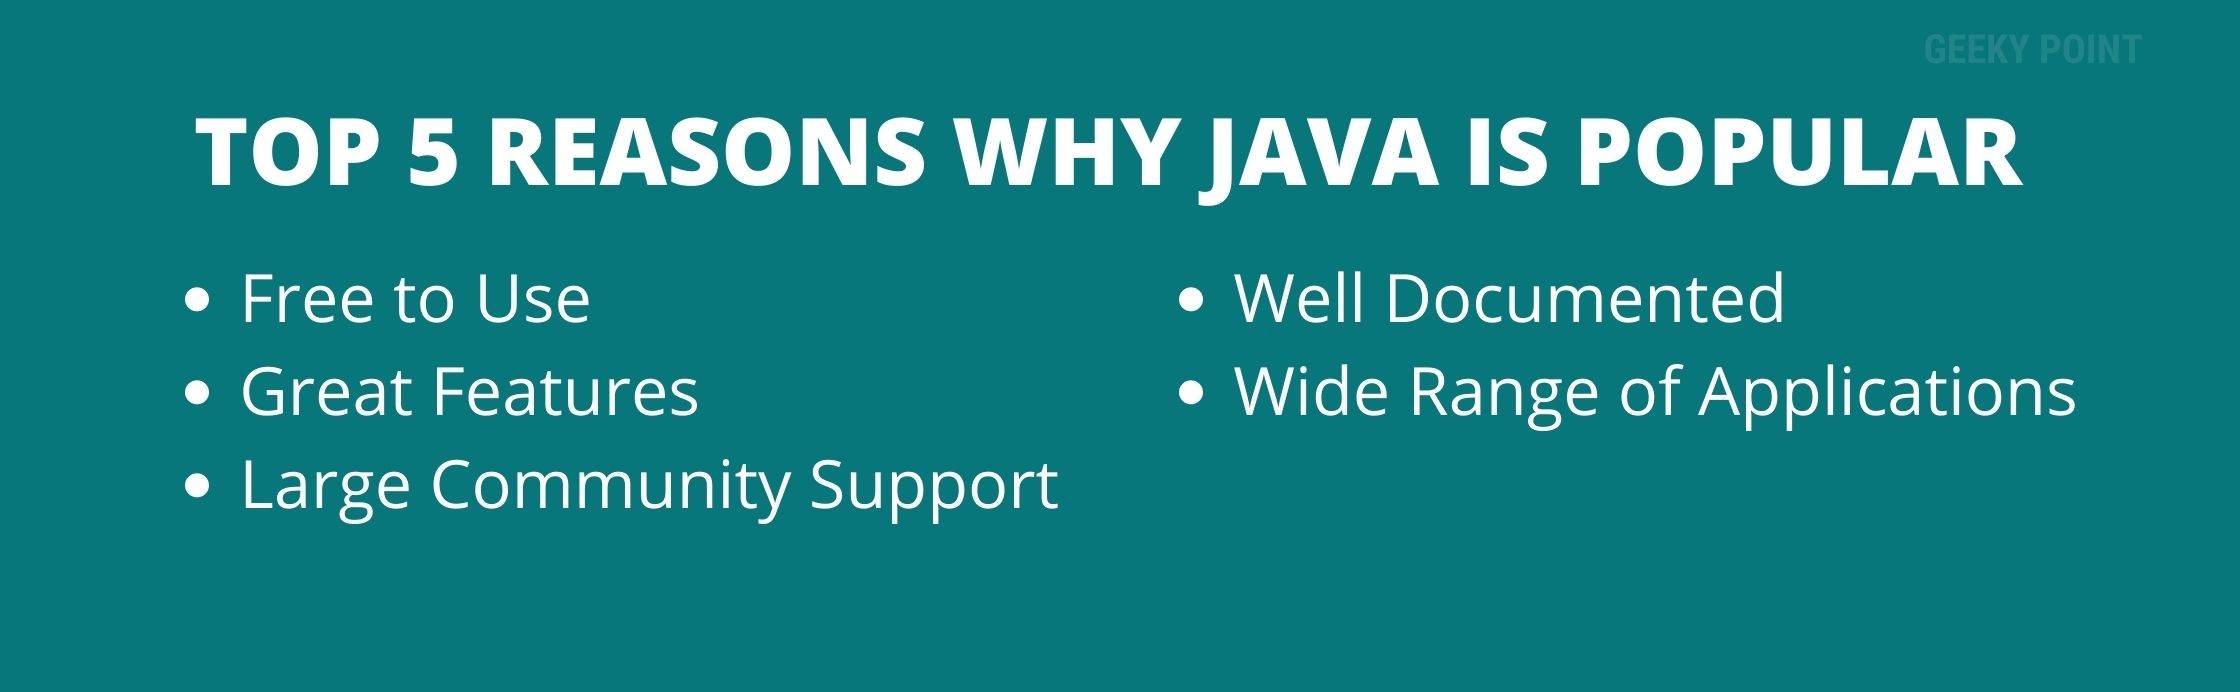 Top 5 reasons why java is popular